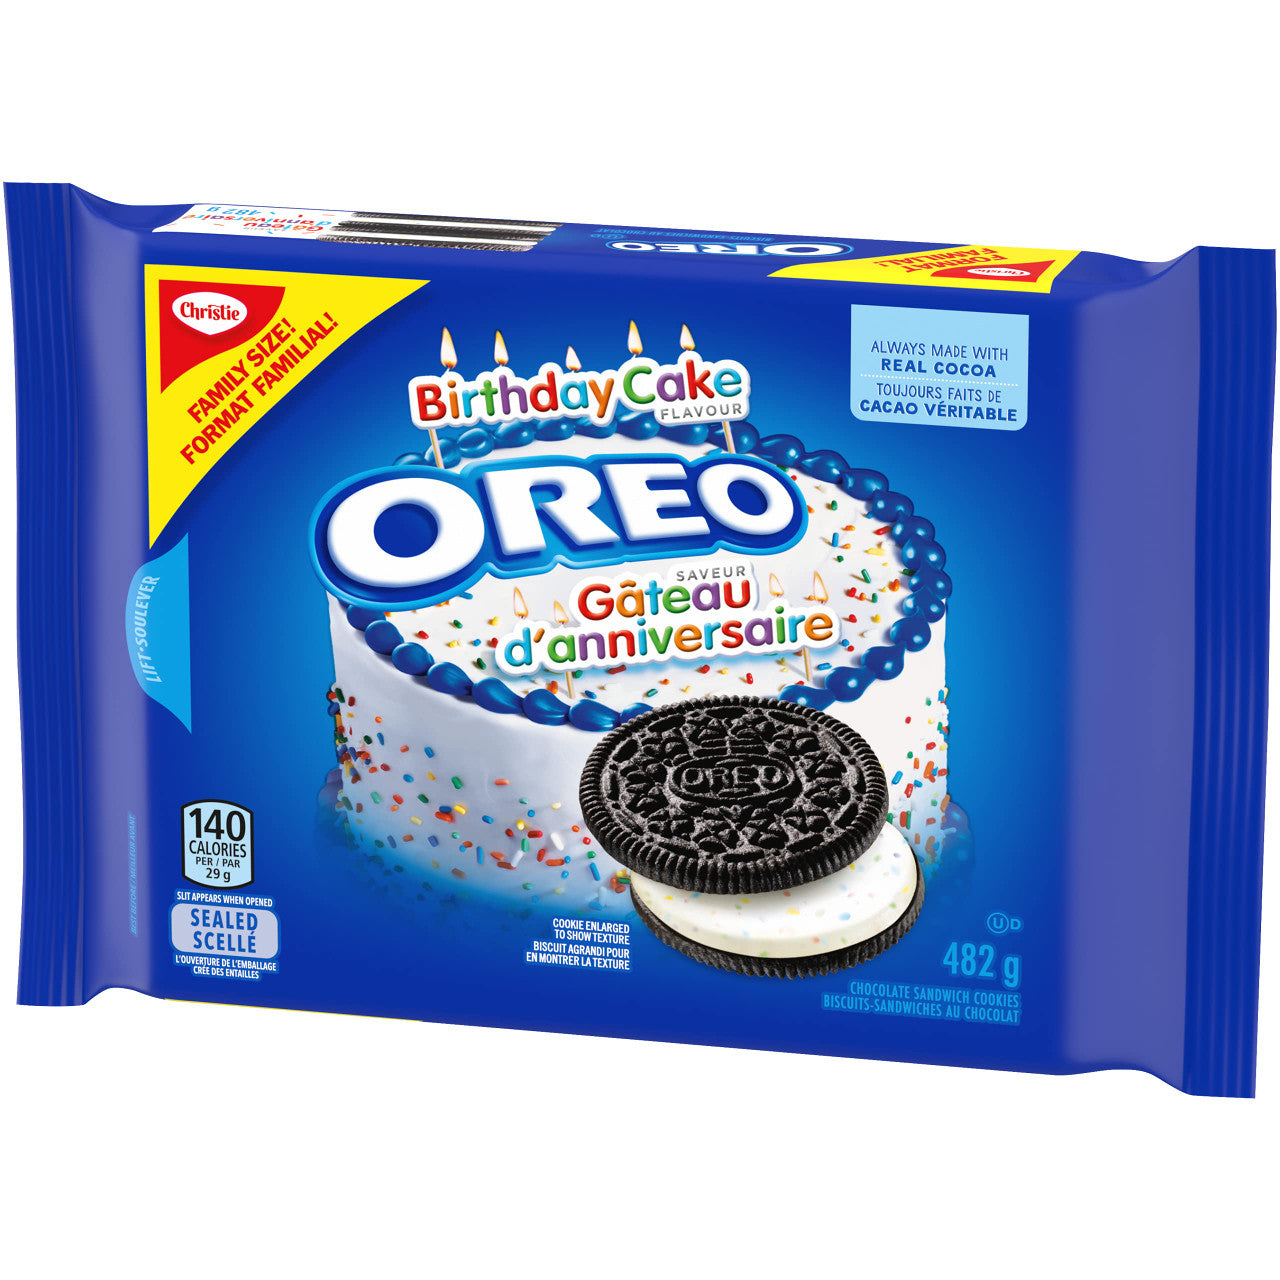 Christie, Oreo Birthday Cake Flavour Cookies, Family Size, 482g/17 oz, Bag {Imported from Canada}